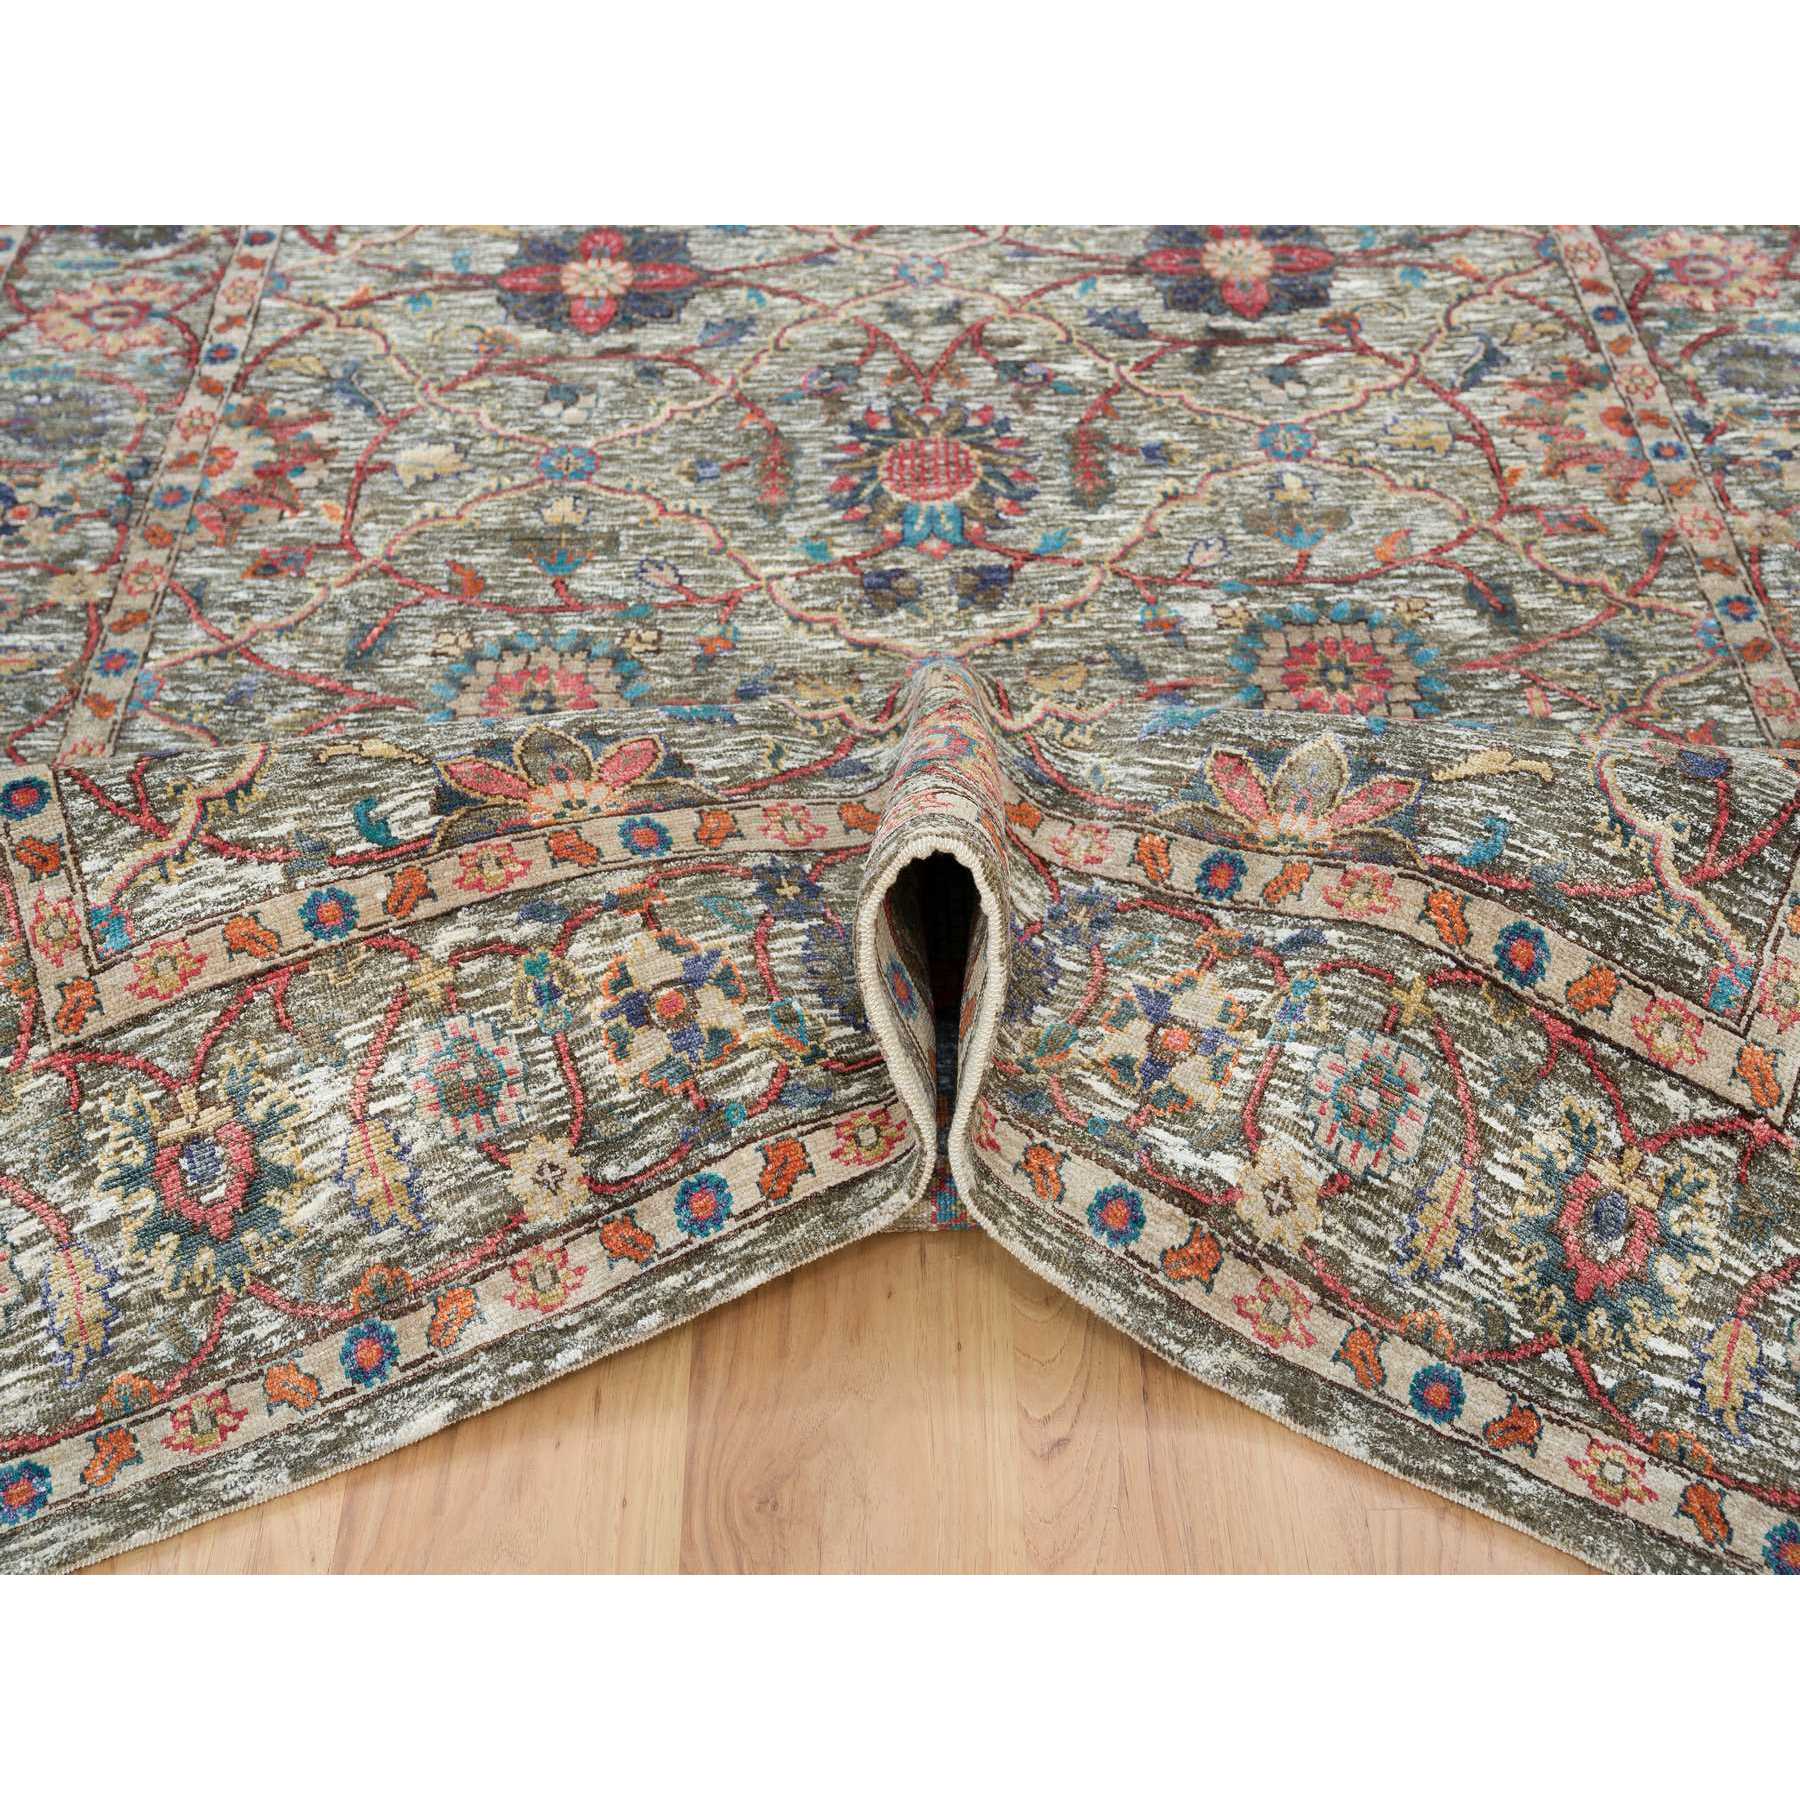  Silk Hand-Knotted Area Rug 6'4